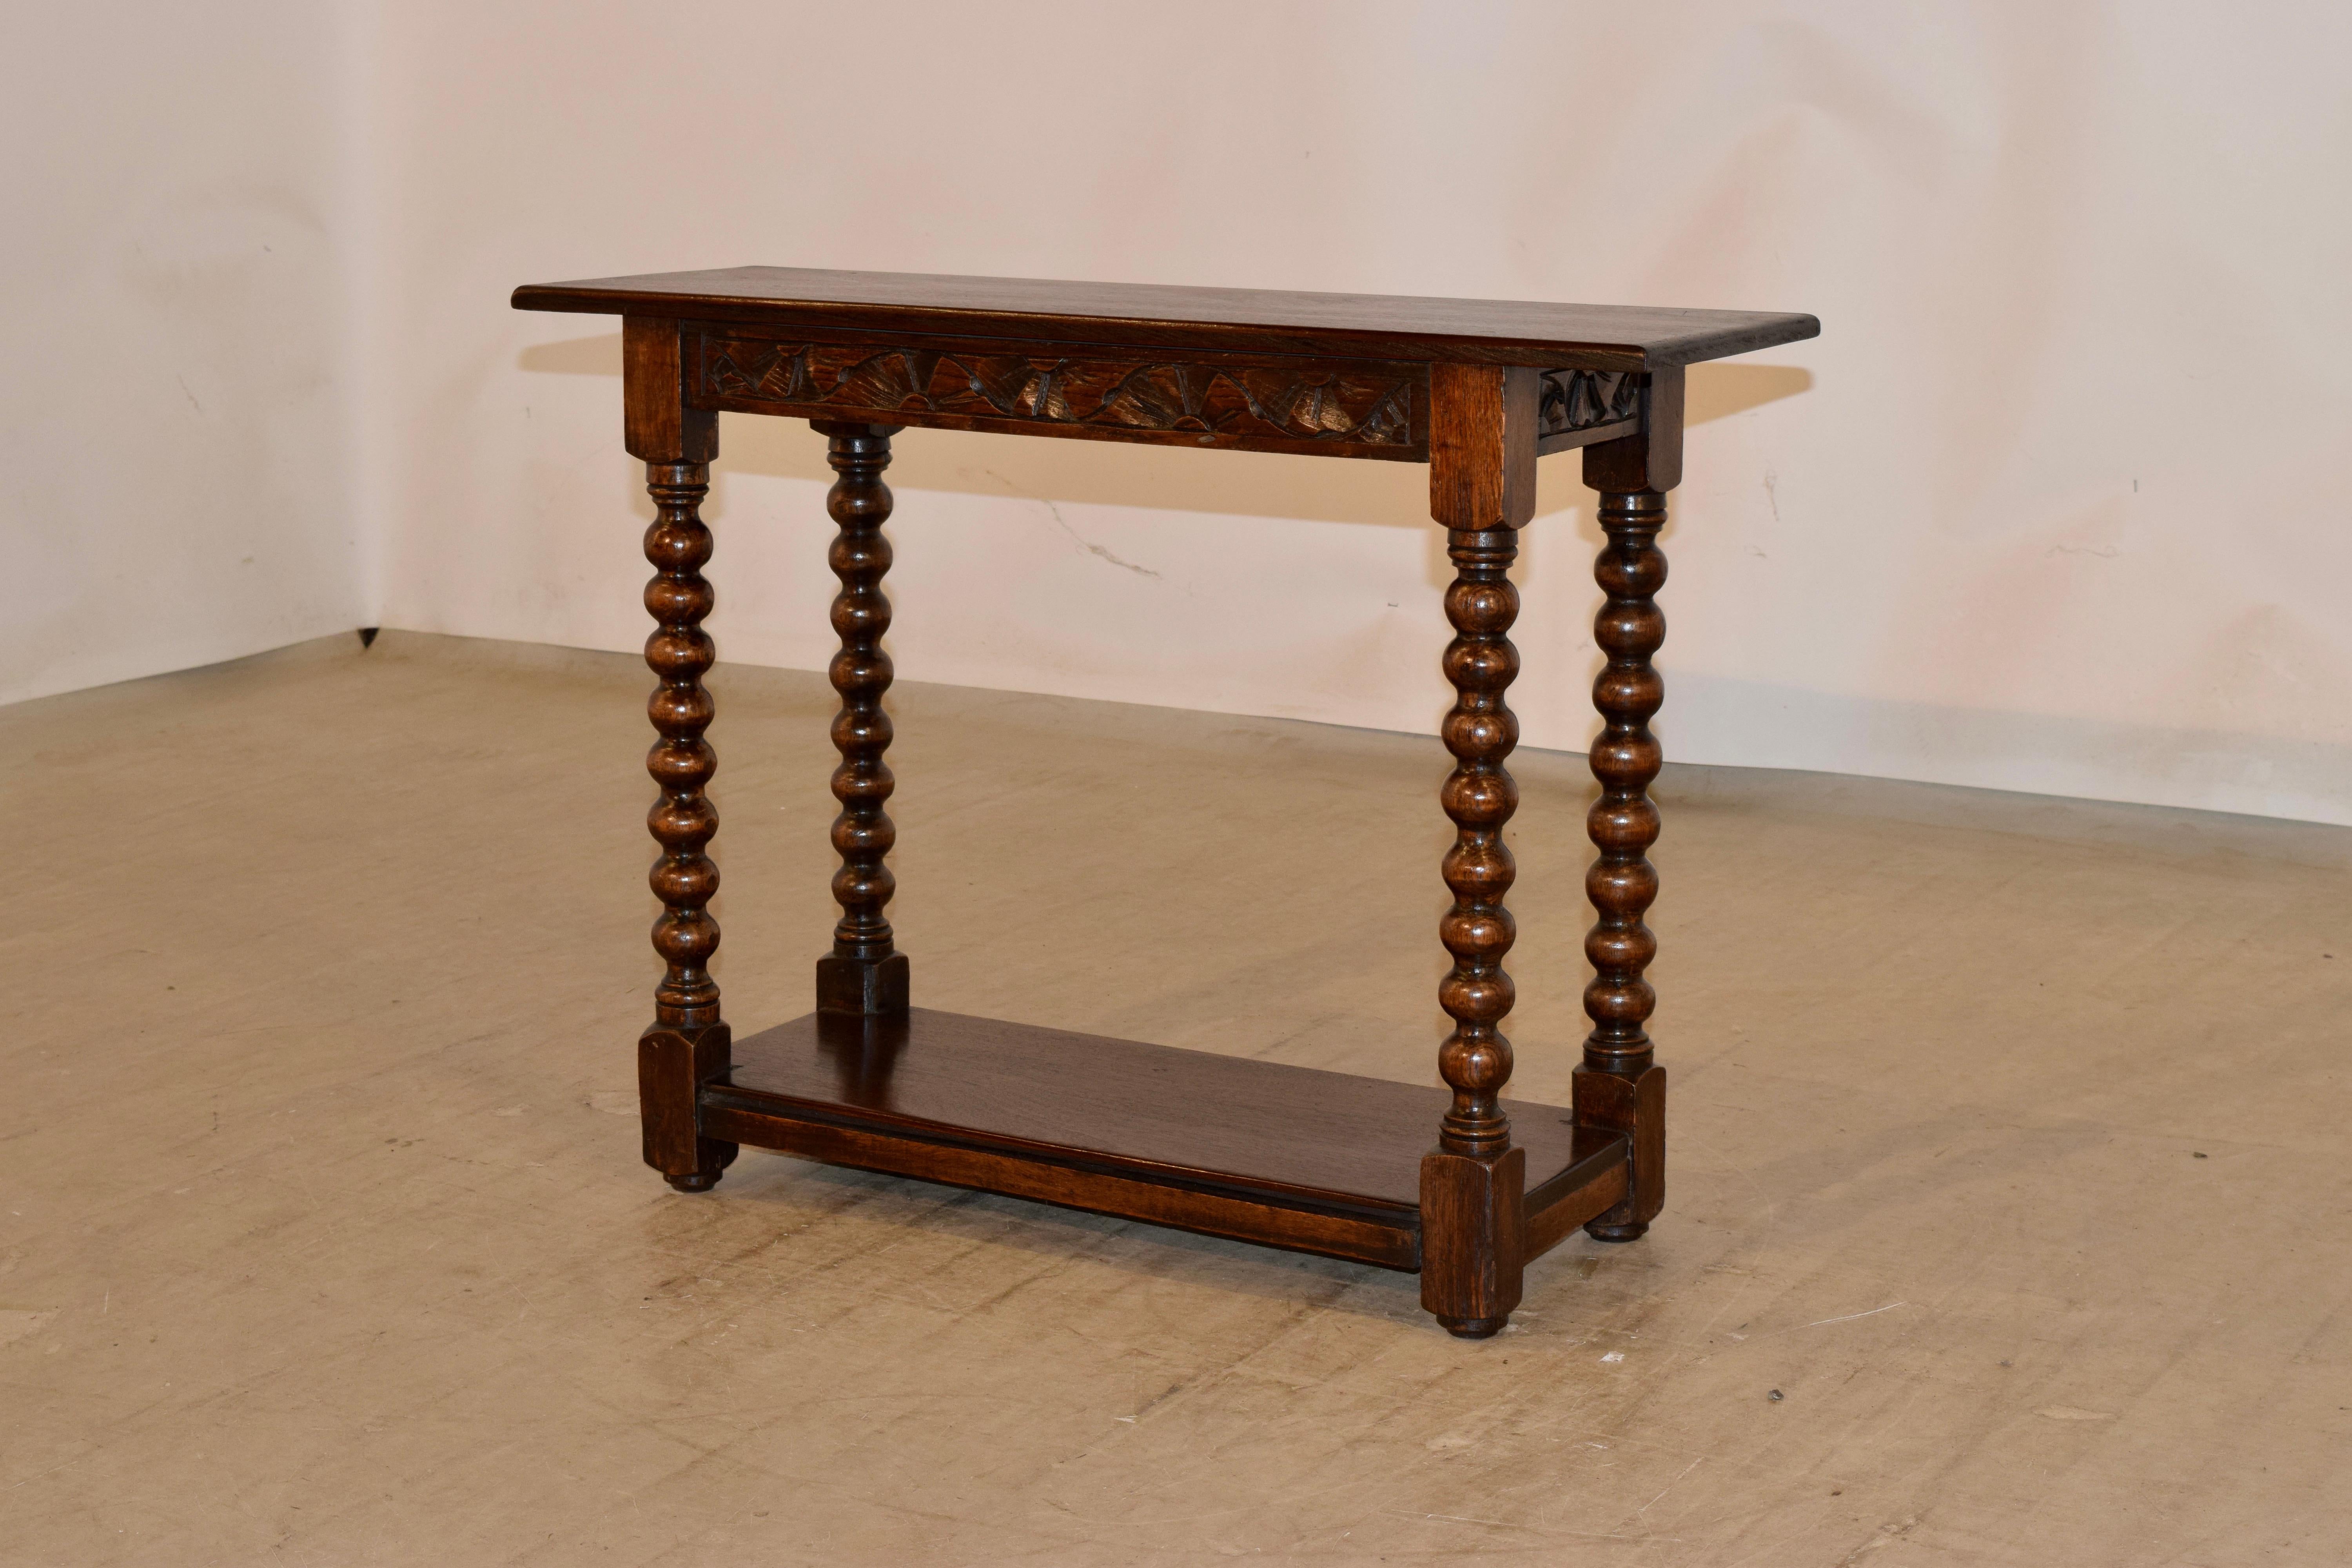 Hand-Carved 19th Century English Slender Bench